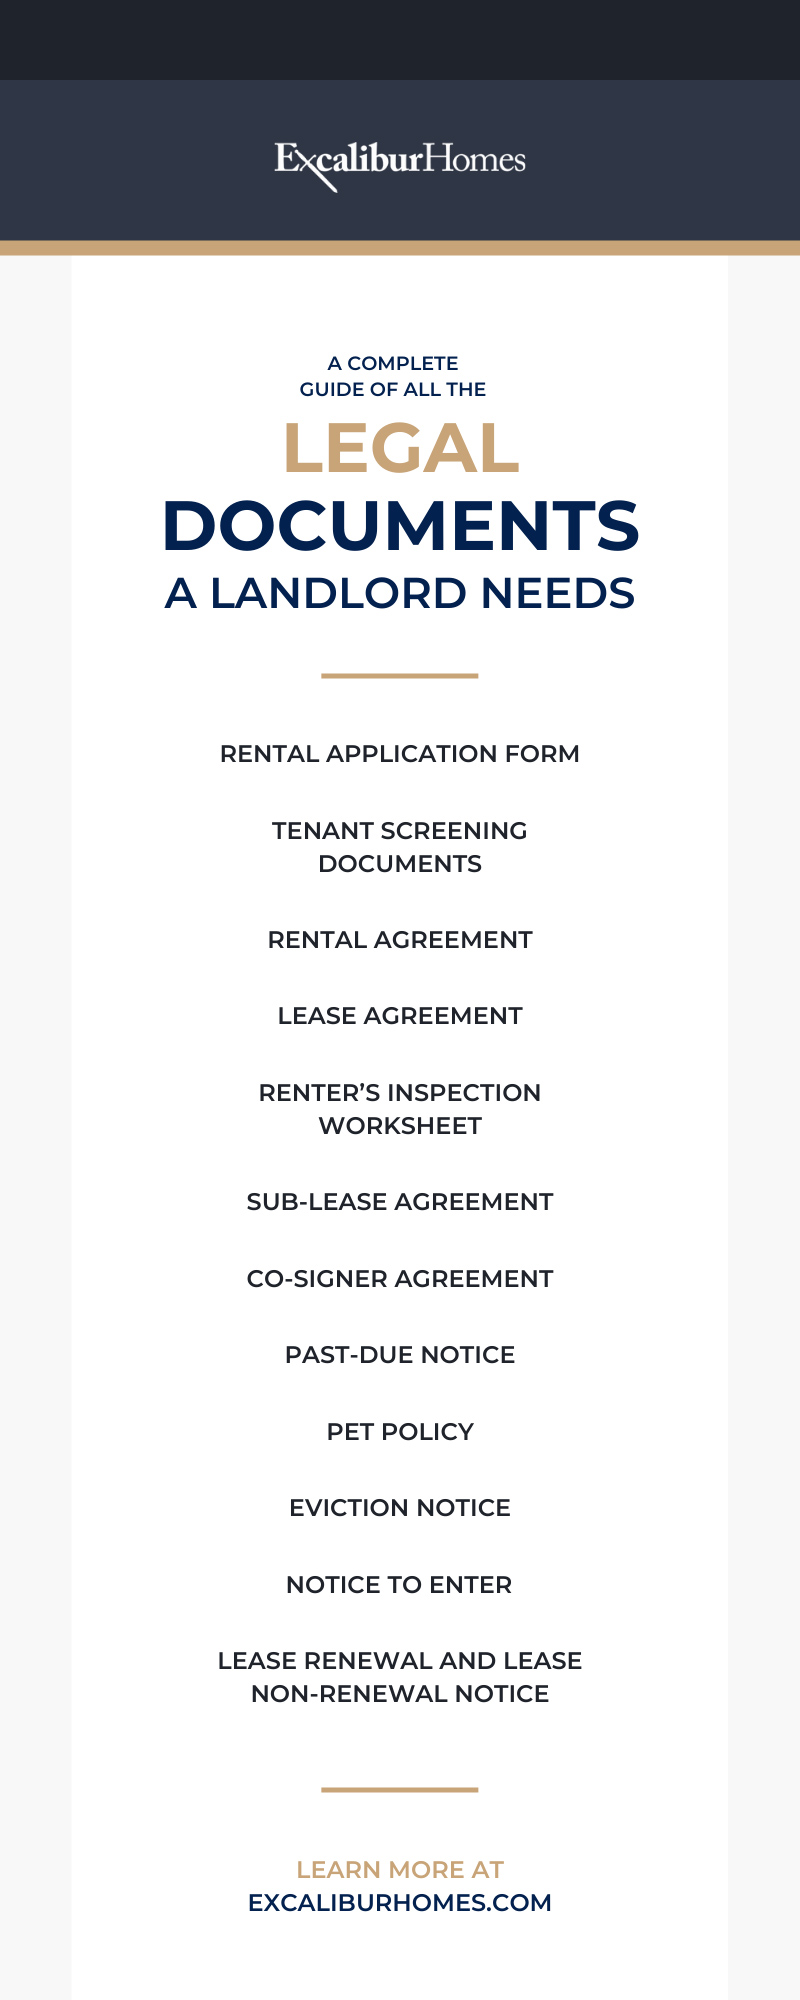 A Complete Guide of All the Legal Documents a Landlord Needs